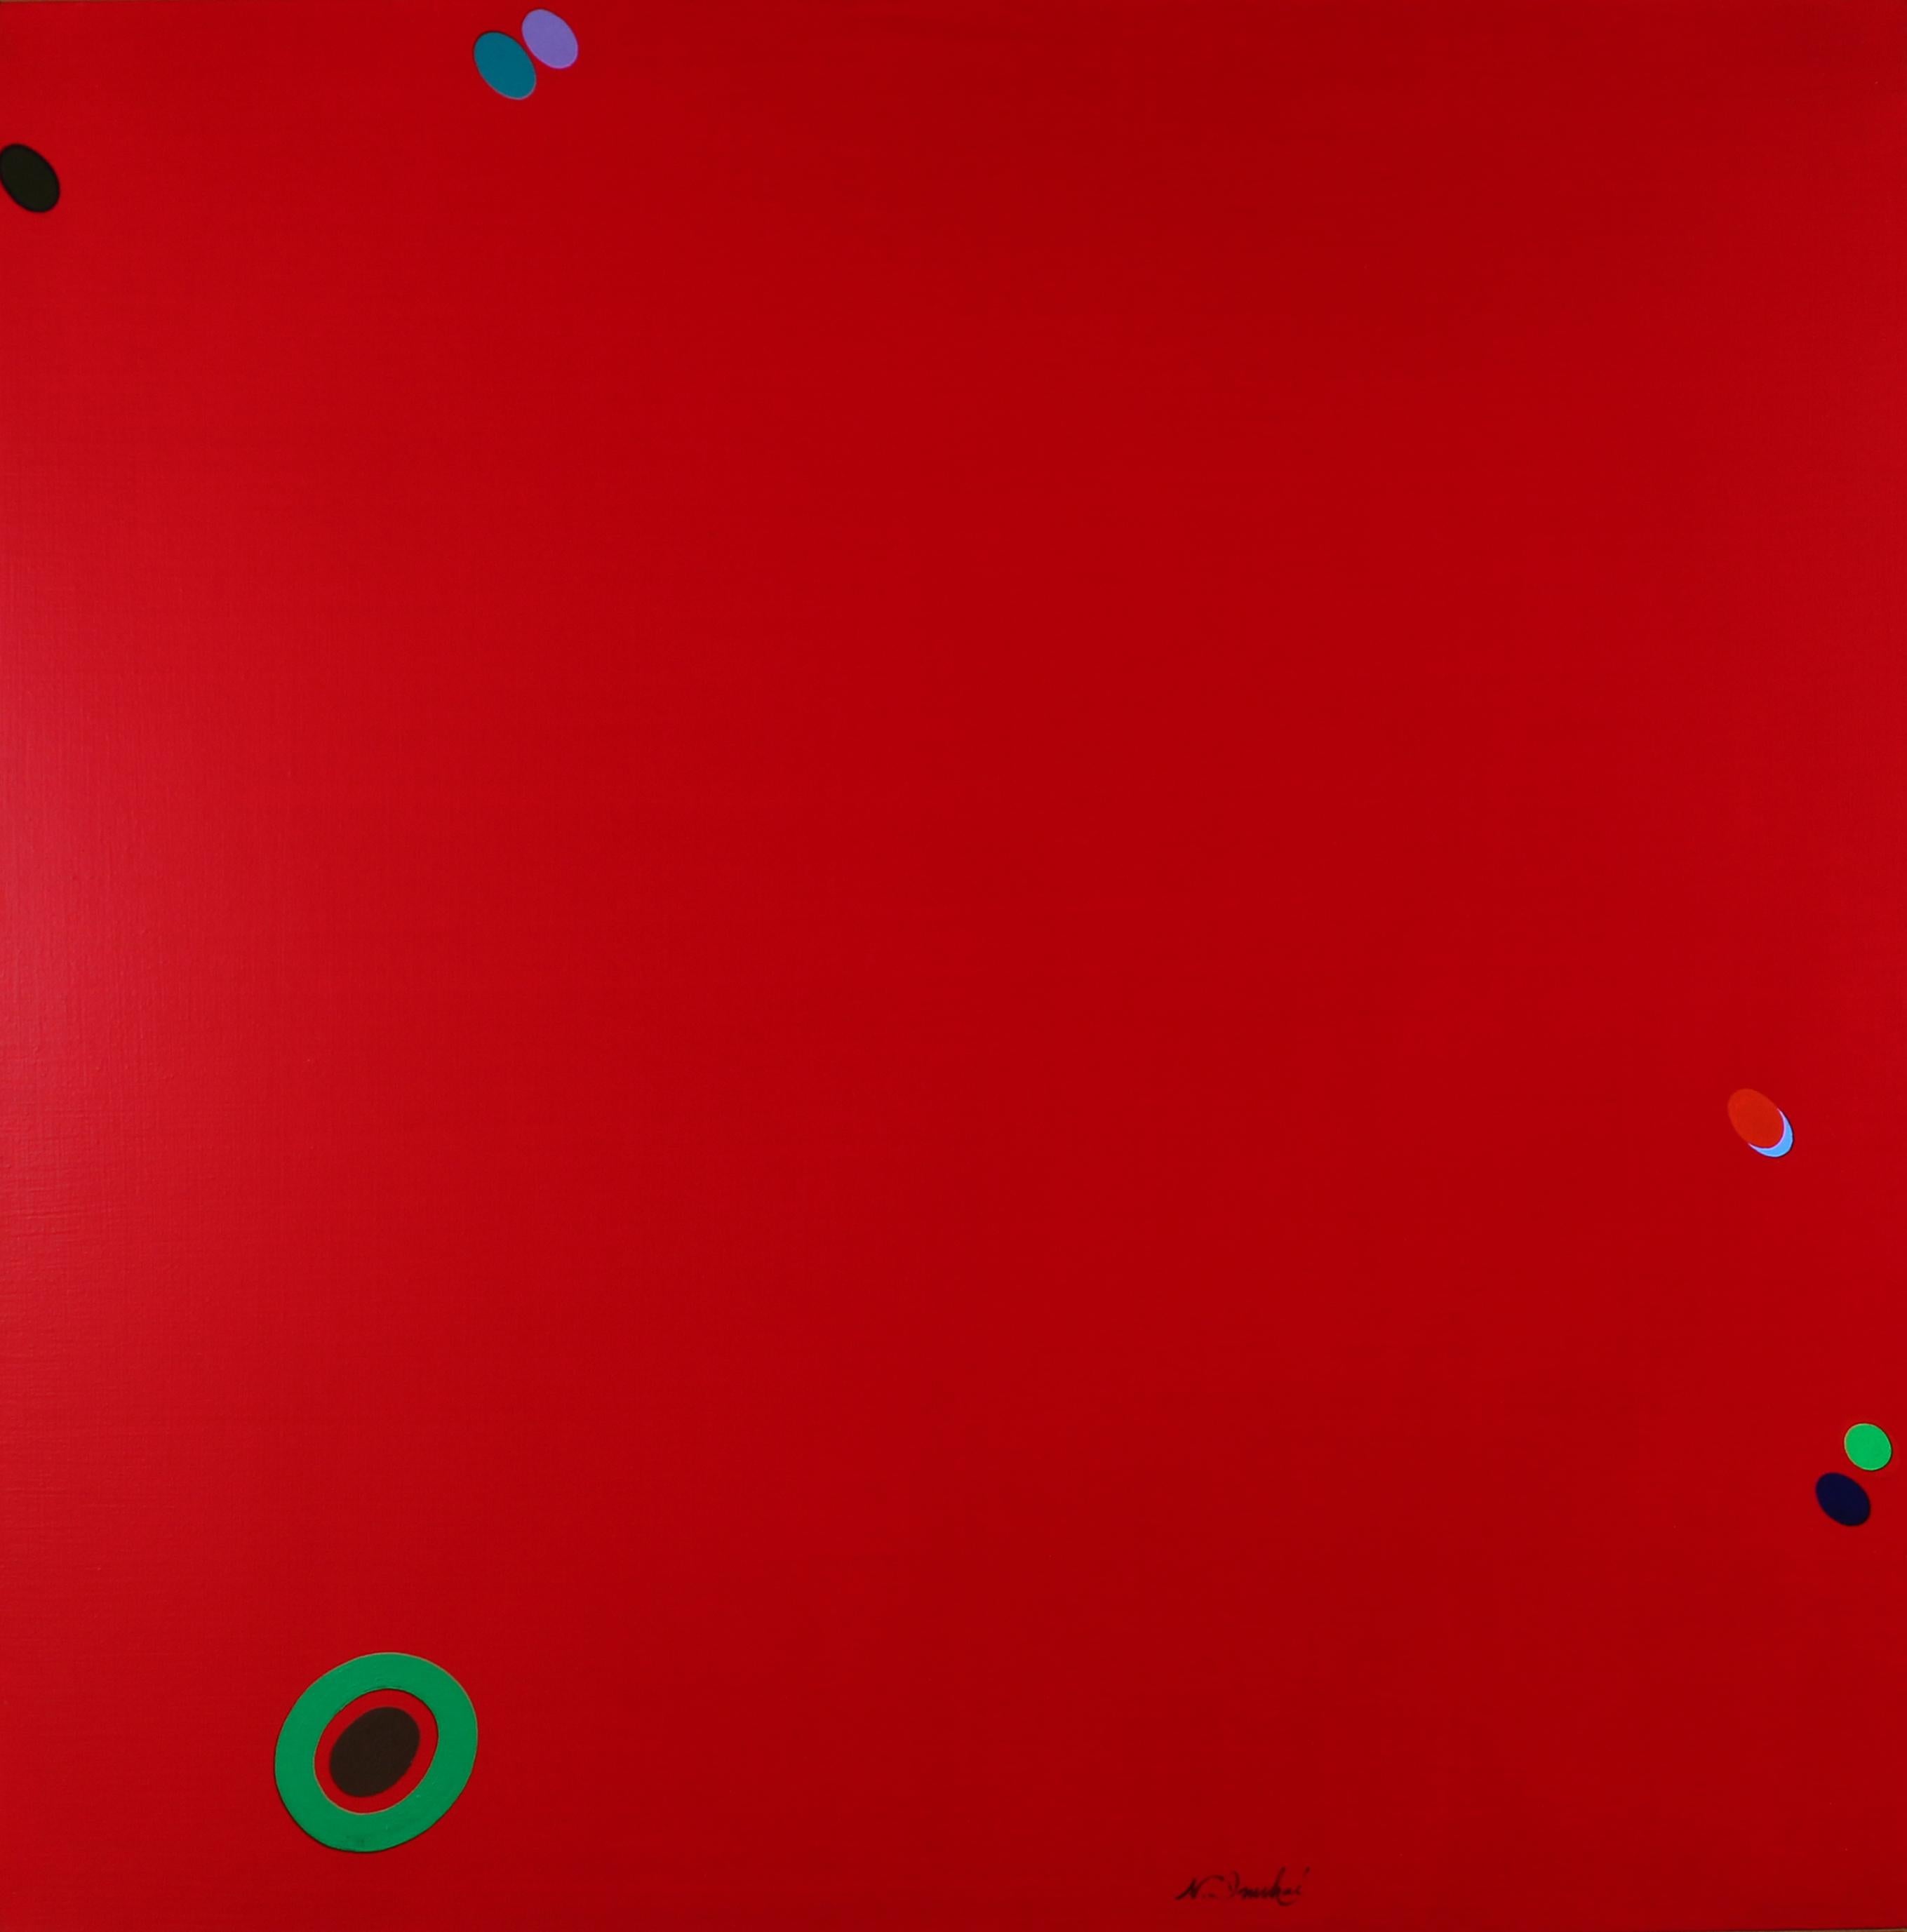 Untitled Red with Floating Dots painting by Naohiko Inukai - Painting by Naohiko Inukai 